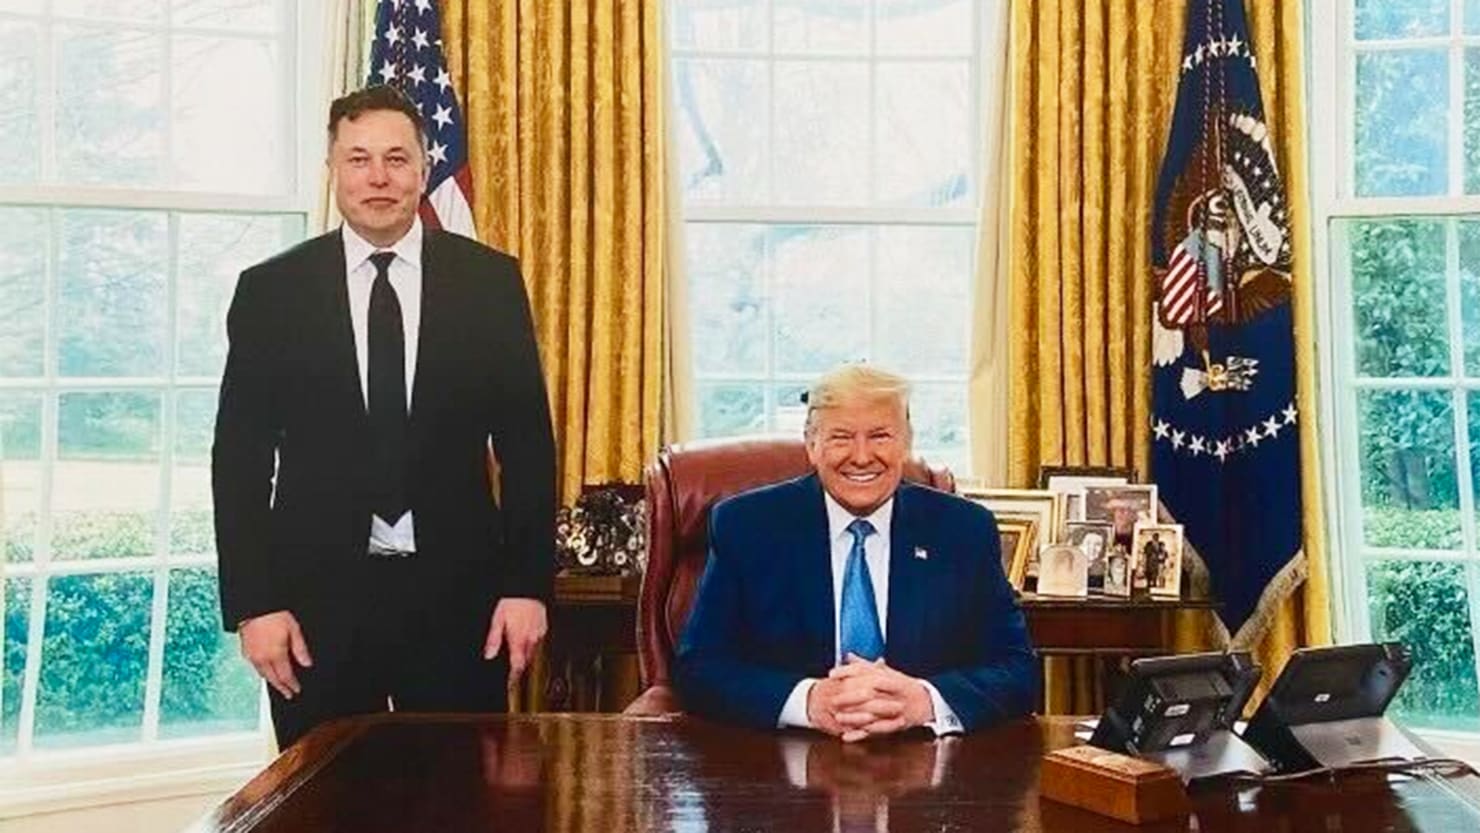 Donald Trump said he could have made Elon Musk fall to his knees